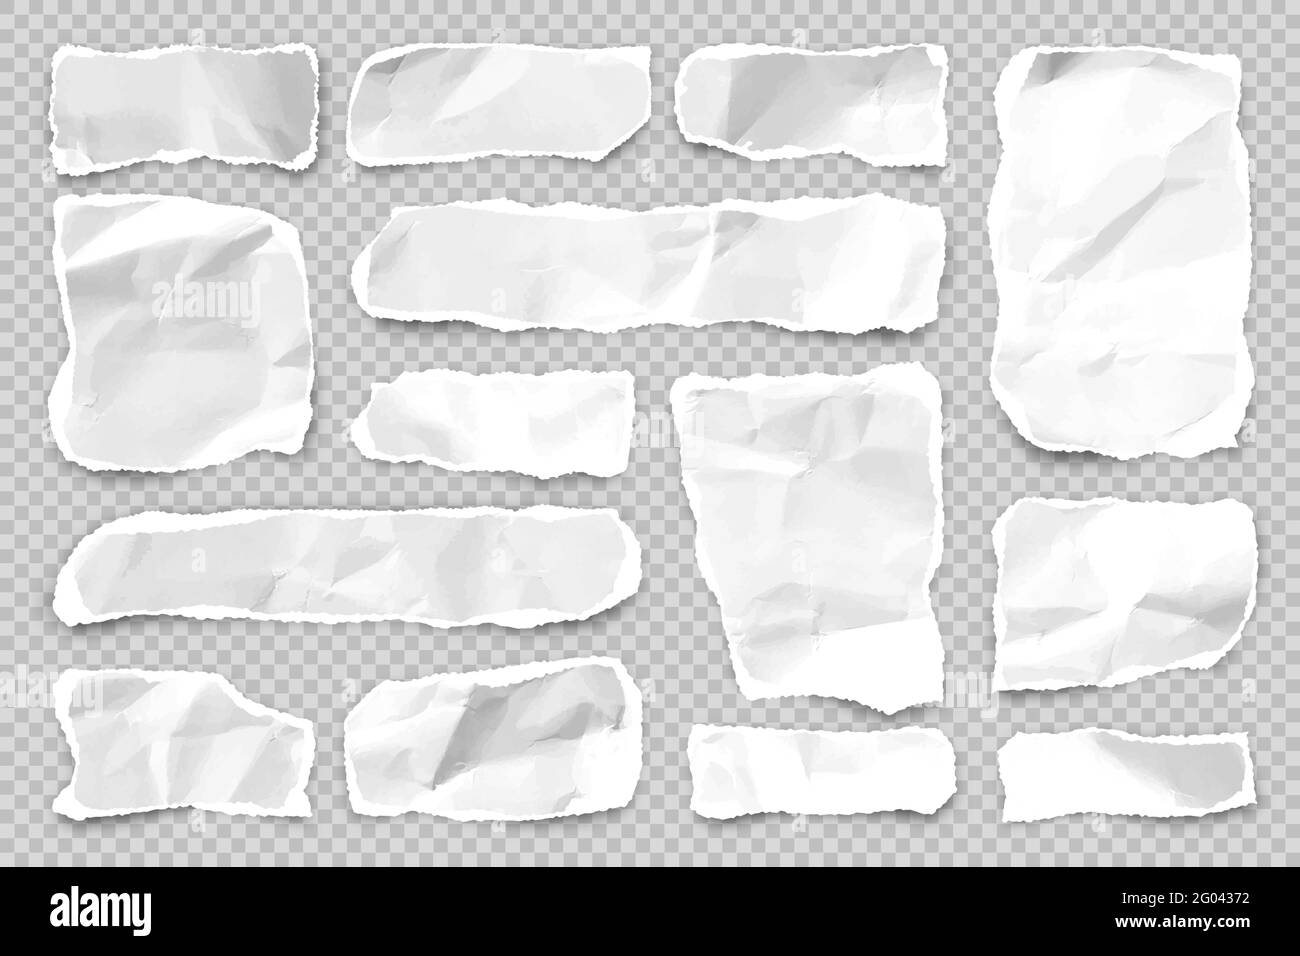 Ripped paper strips on transparent background. Realistic crumpled paper ...